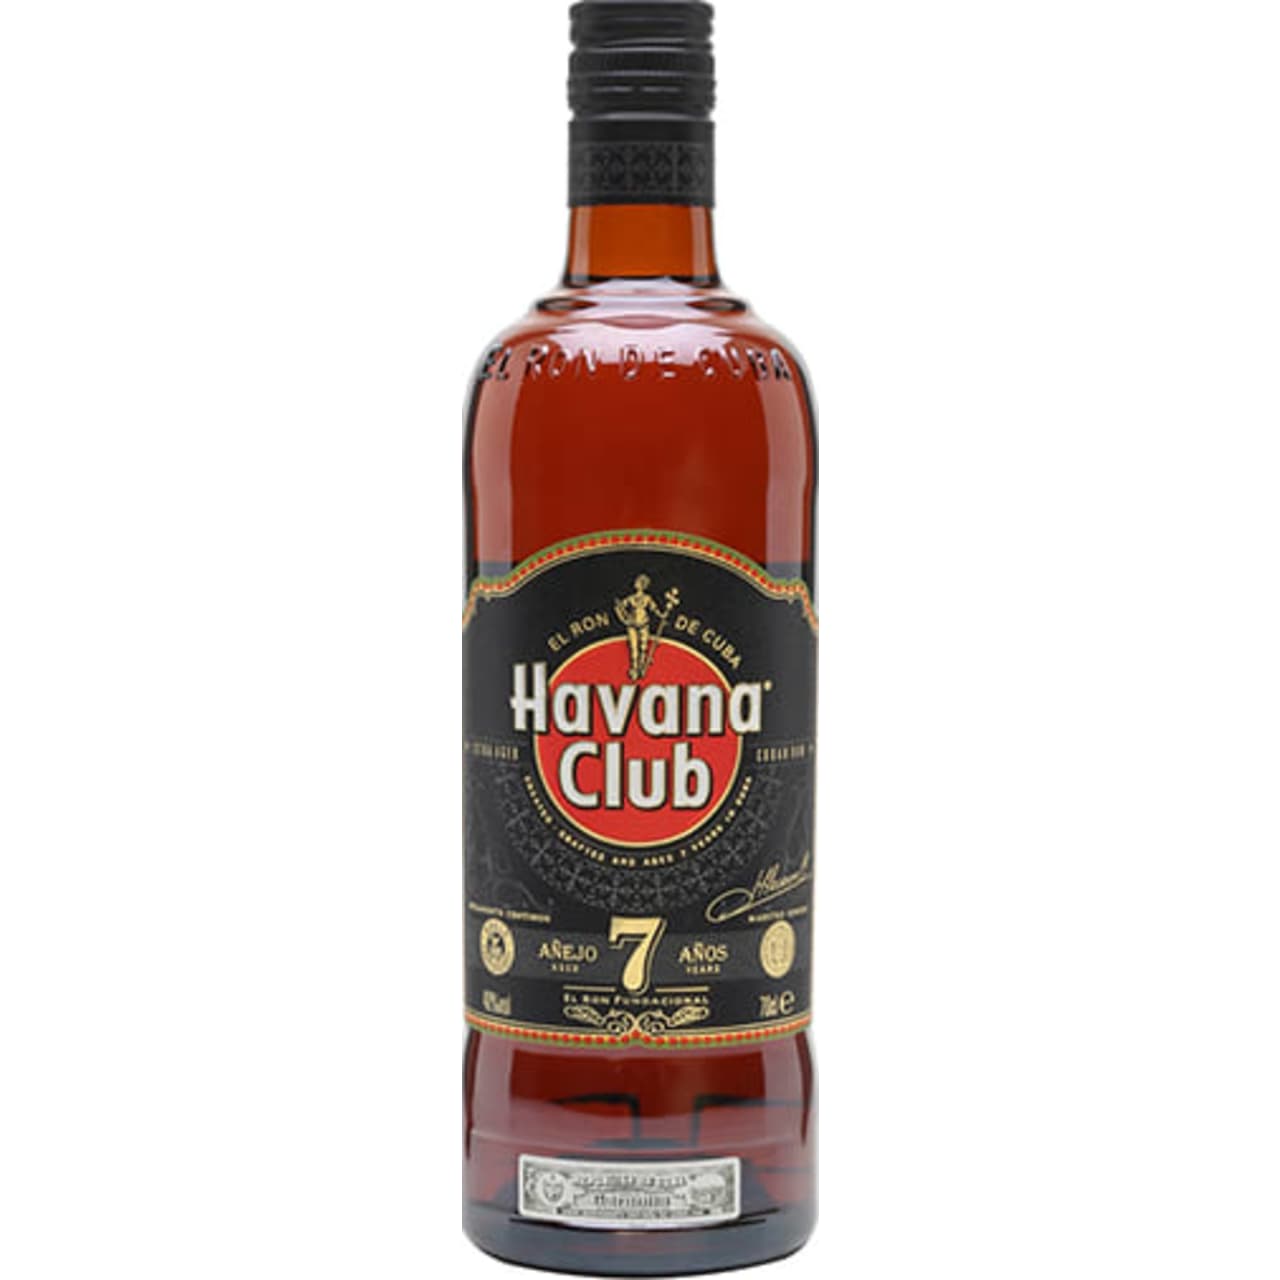 This dark rum, matured in ex-Bourbon barrels, showcases the rich natural flavours of Cuba. The liquid unveils the tastes of the Cuban terroir: aromatic tobacco, sweet tropical fruits, molasses, spices, and vanilla from the continuous ageing process, enhanced by the slow release of aromas.